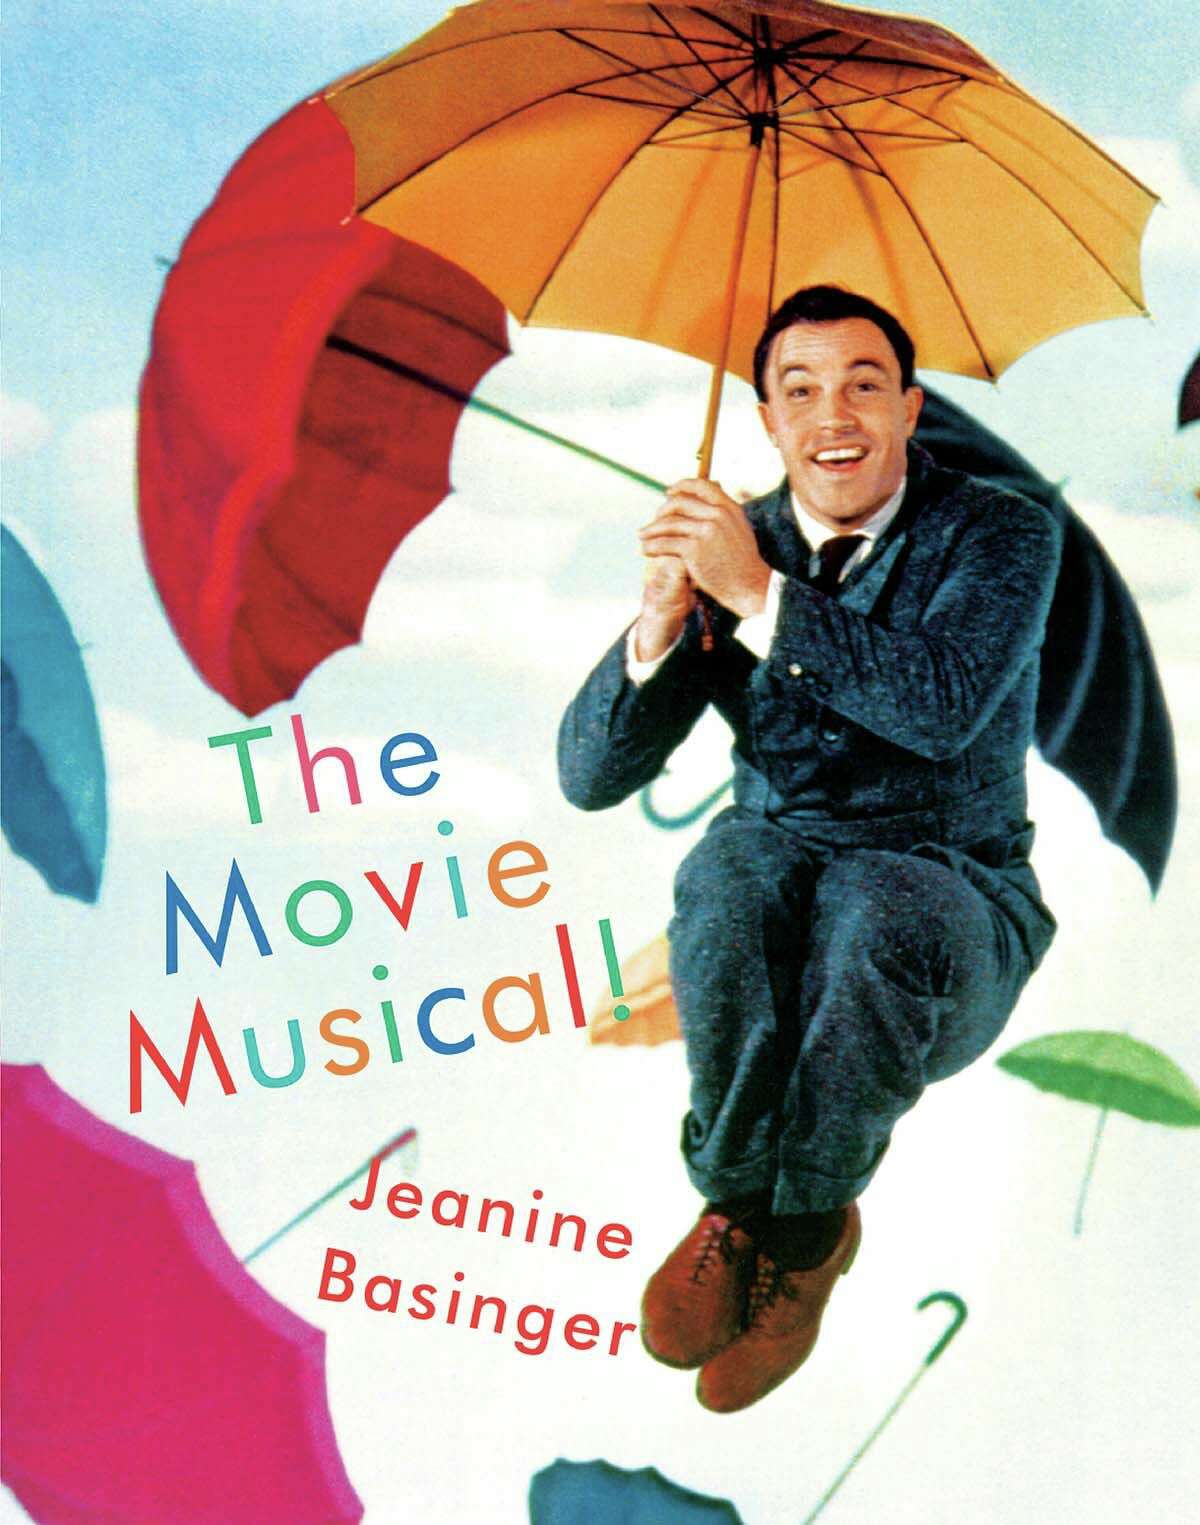 The Movie Musical! book cover.jpg